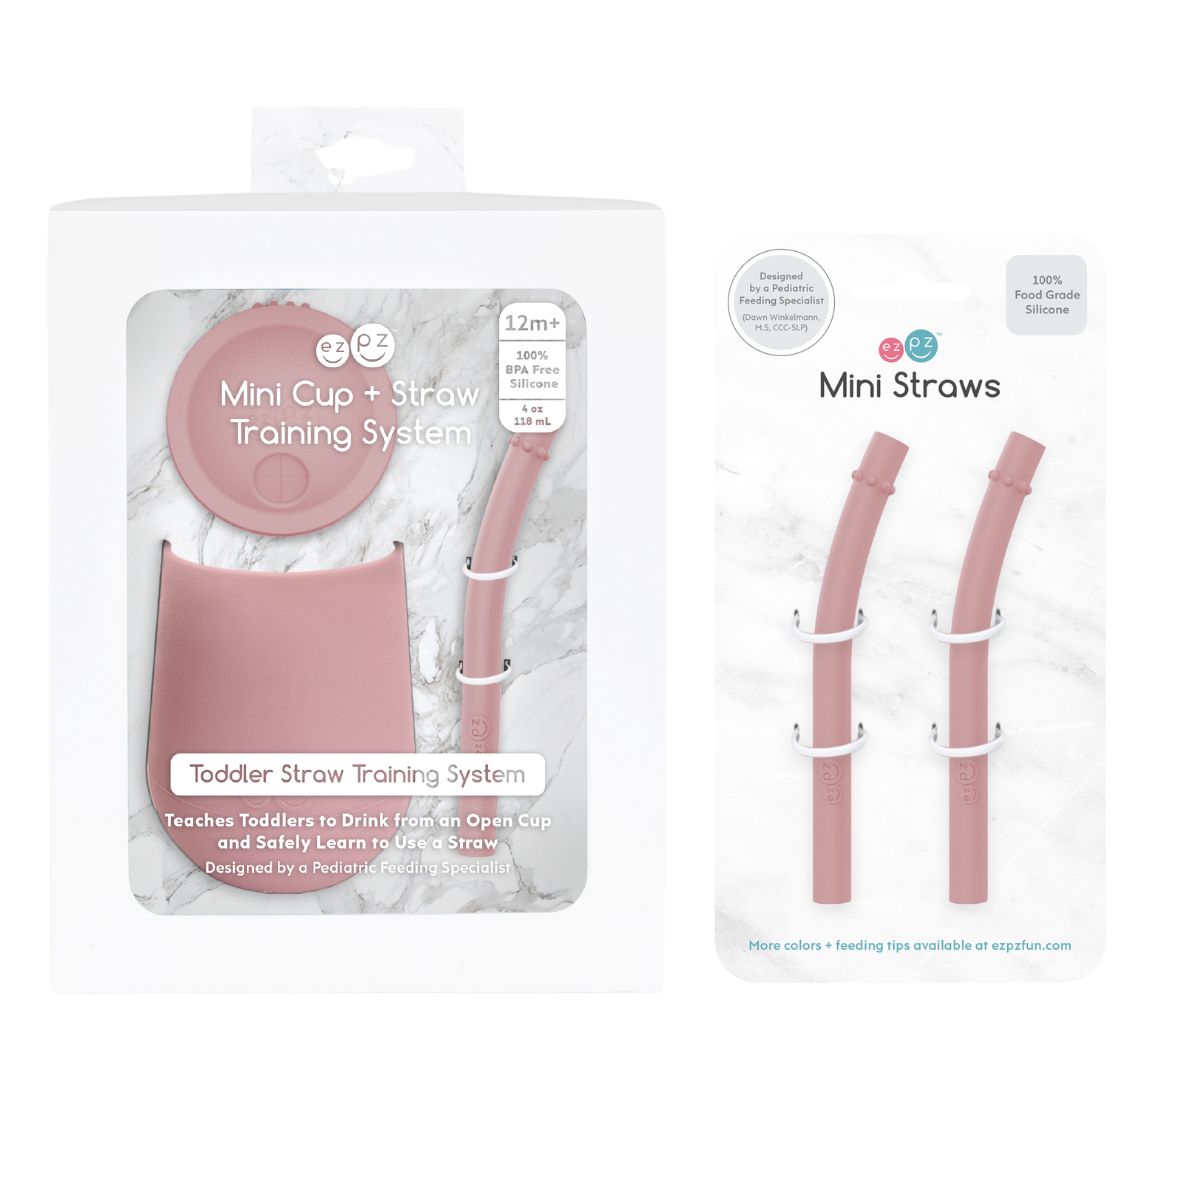 ezpz Mini Cup + Straw Training System with Extra 2-Pack of Straws in Blush